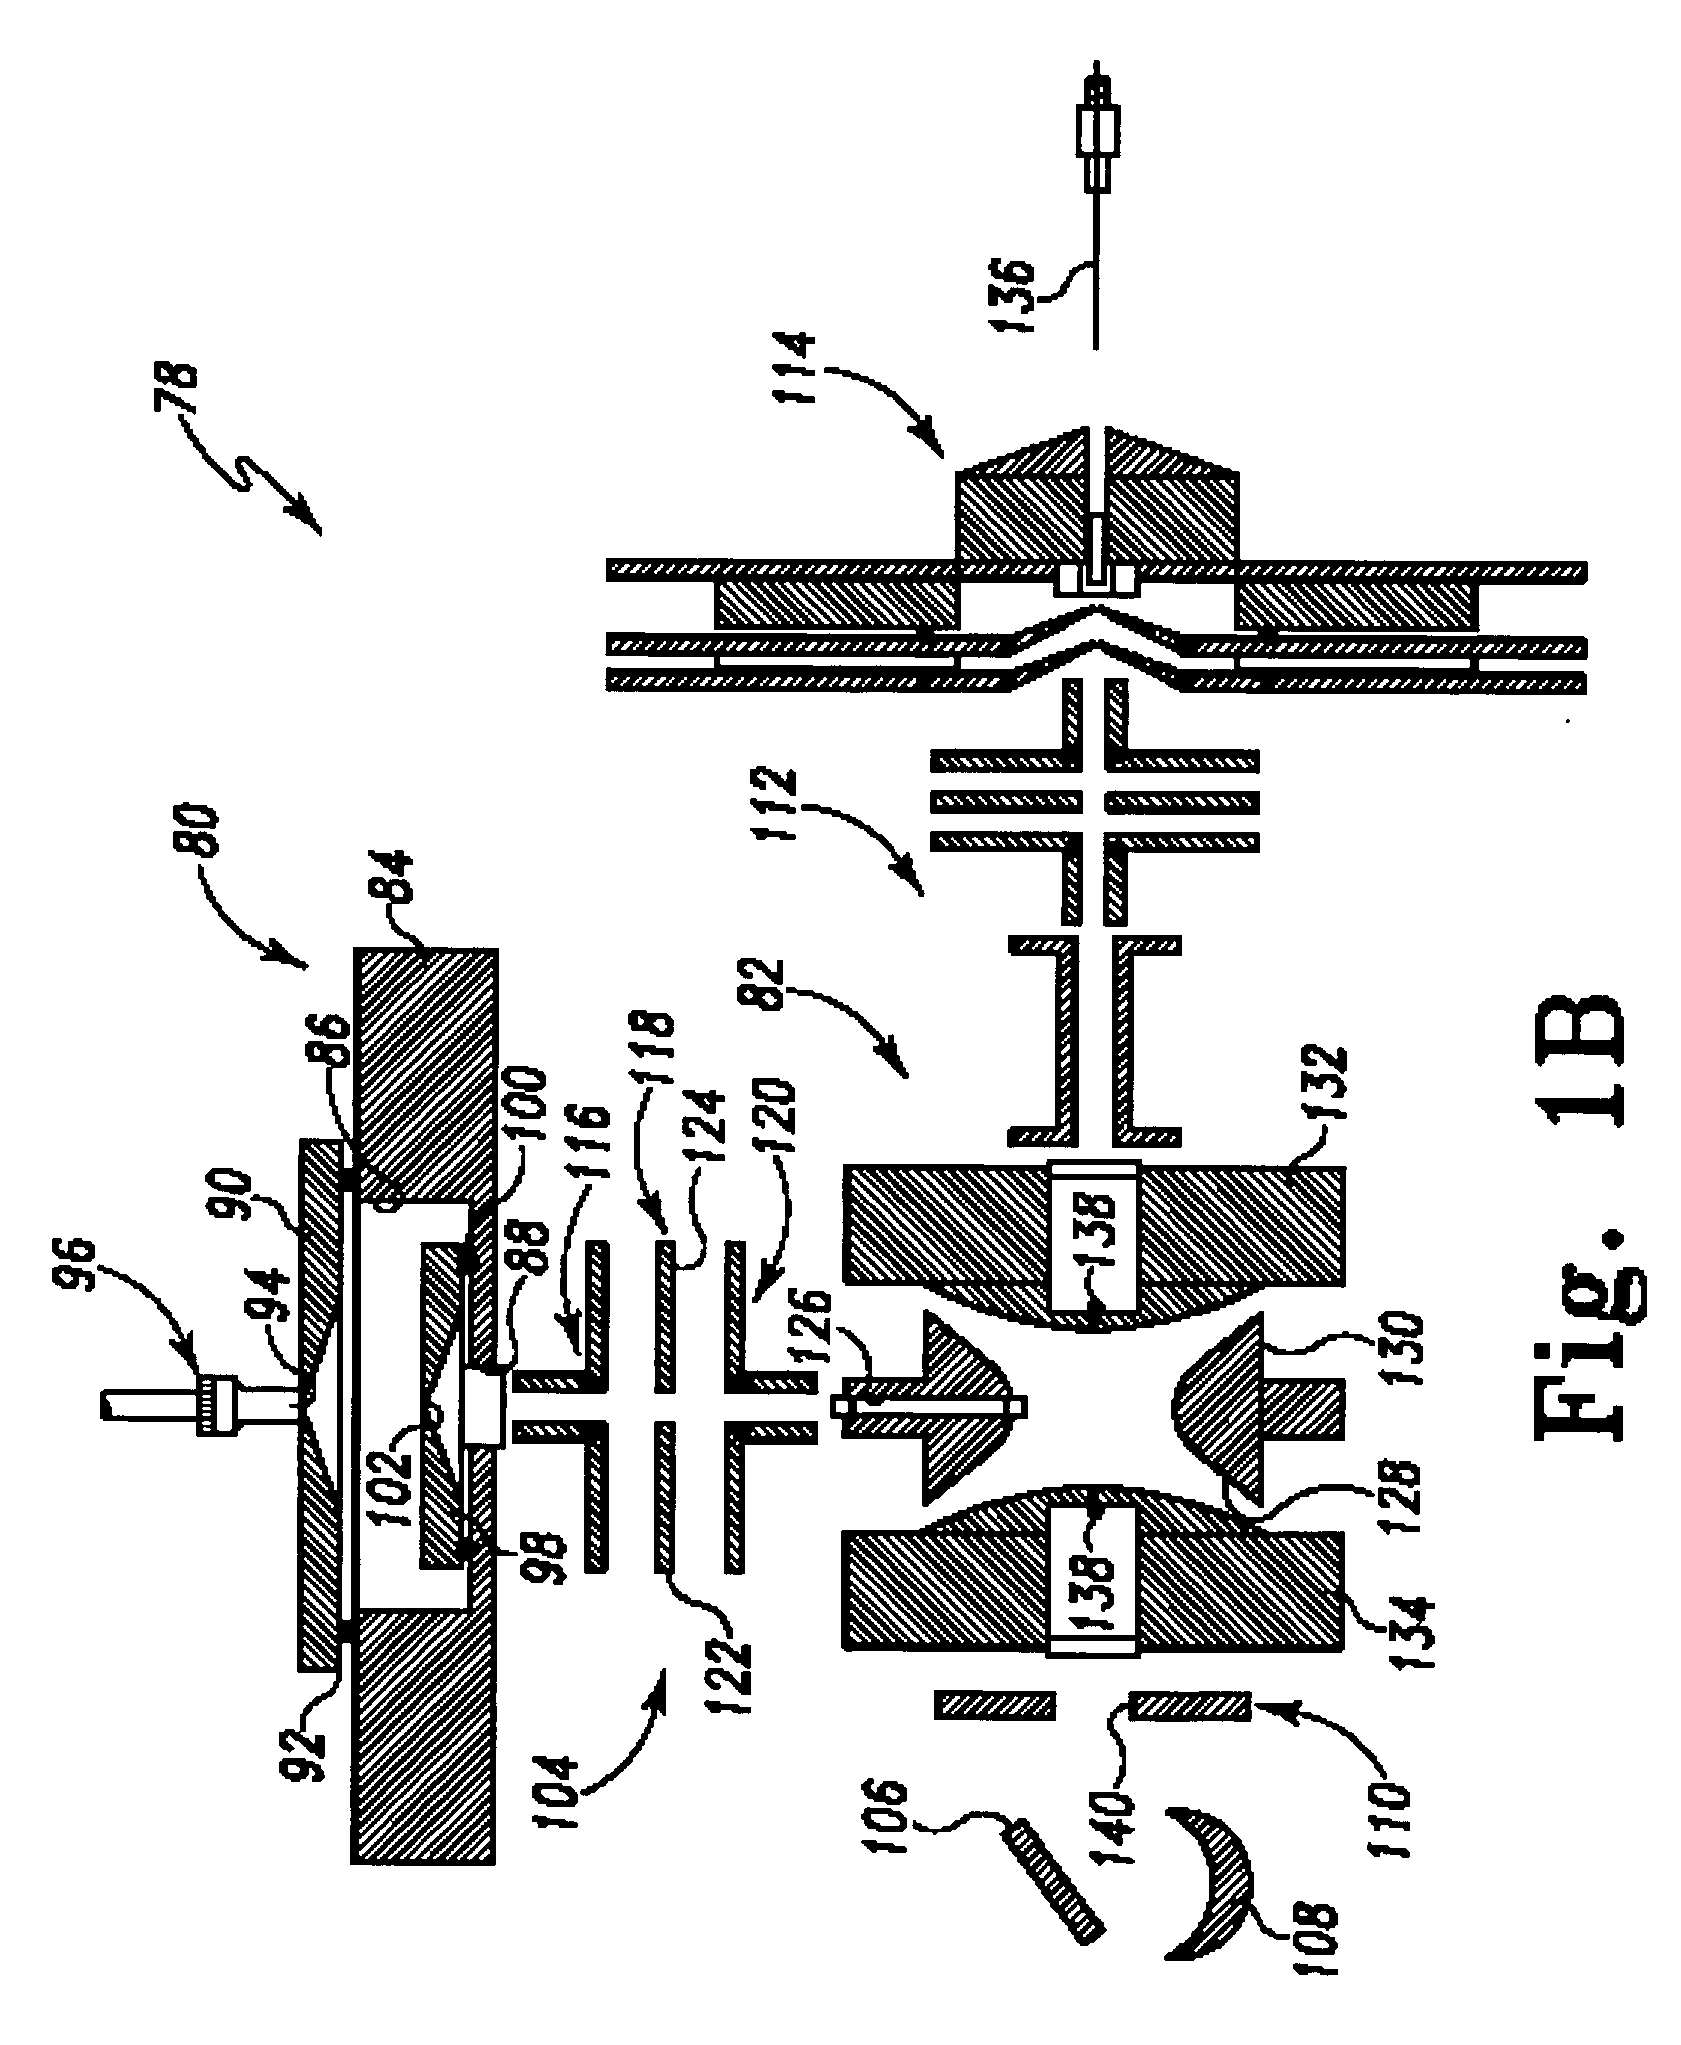 Method of selectively inhibiting reaction between ions